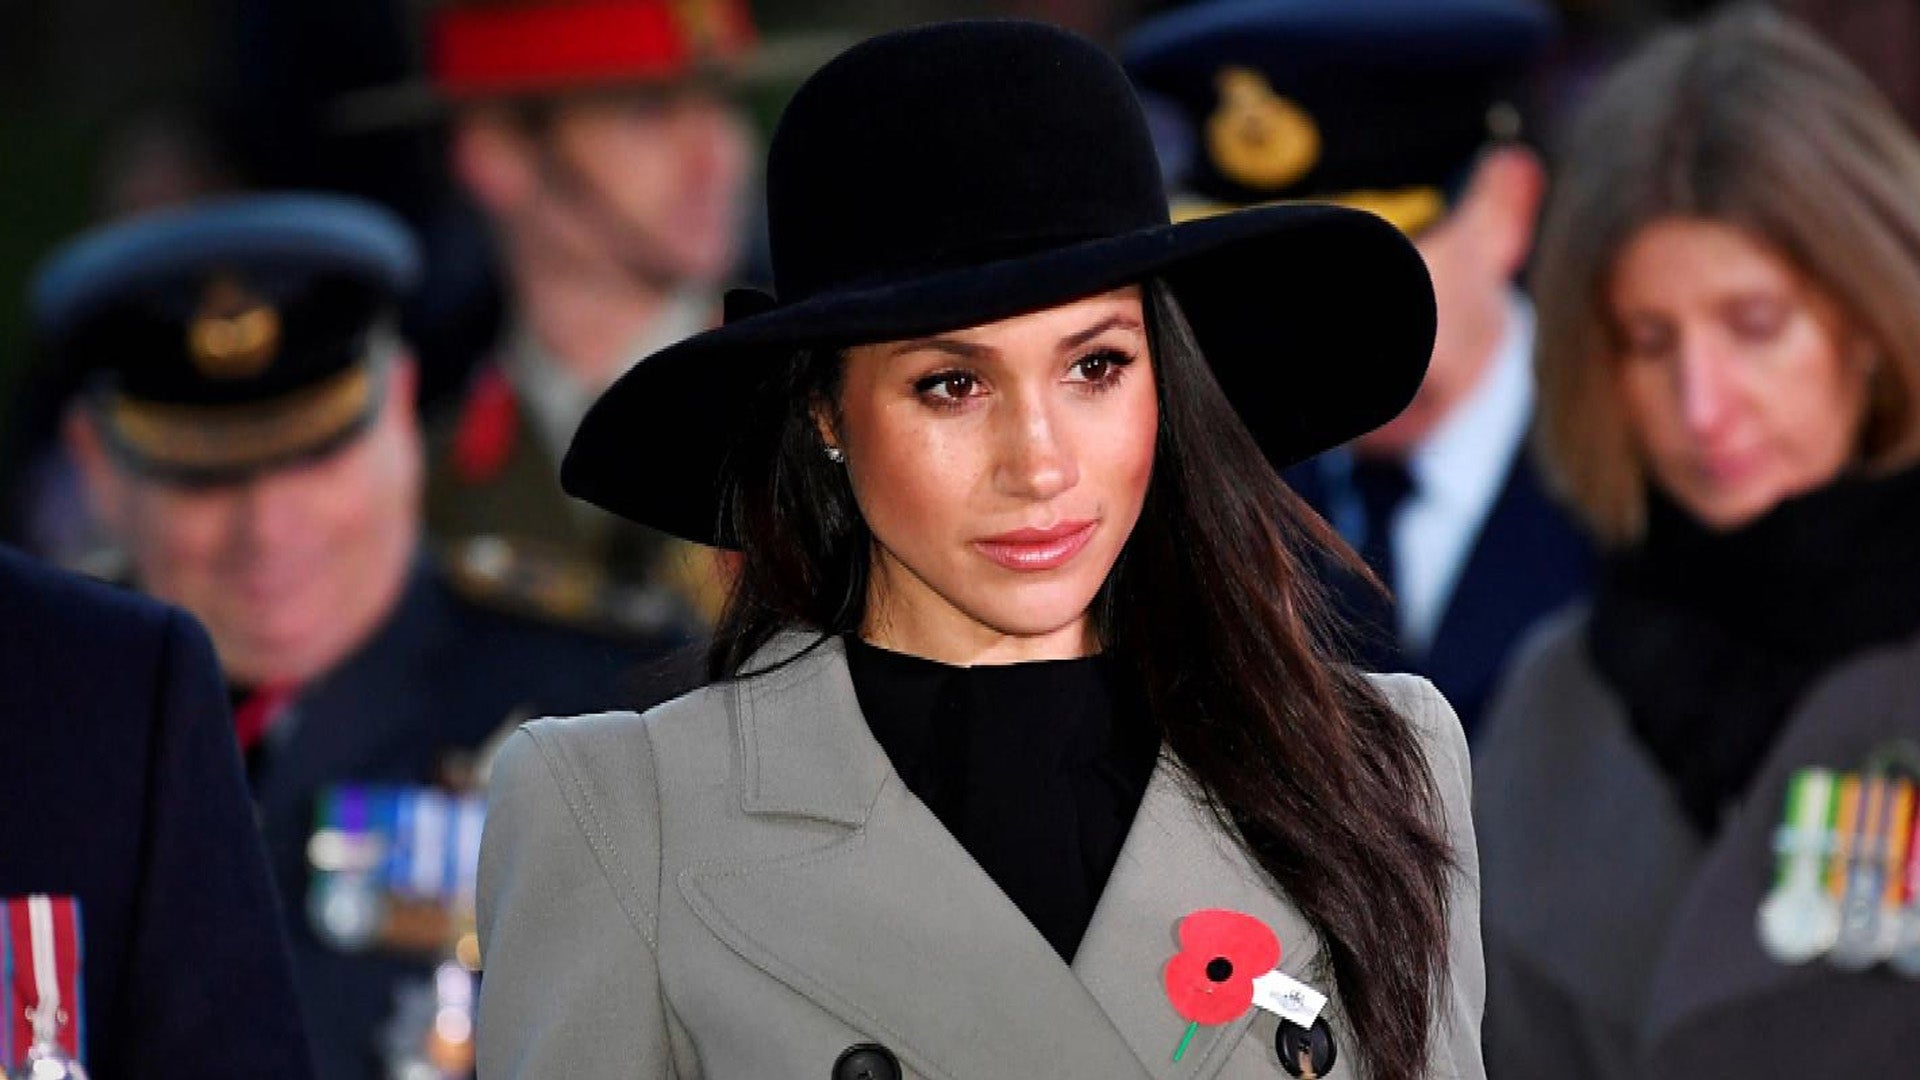 Meghan Markle Reveals She’s ‘Still Healing’ From Royal Experience